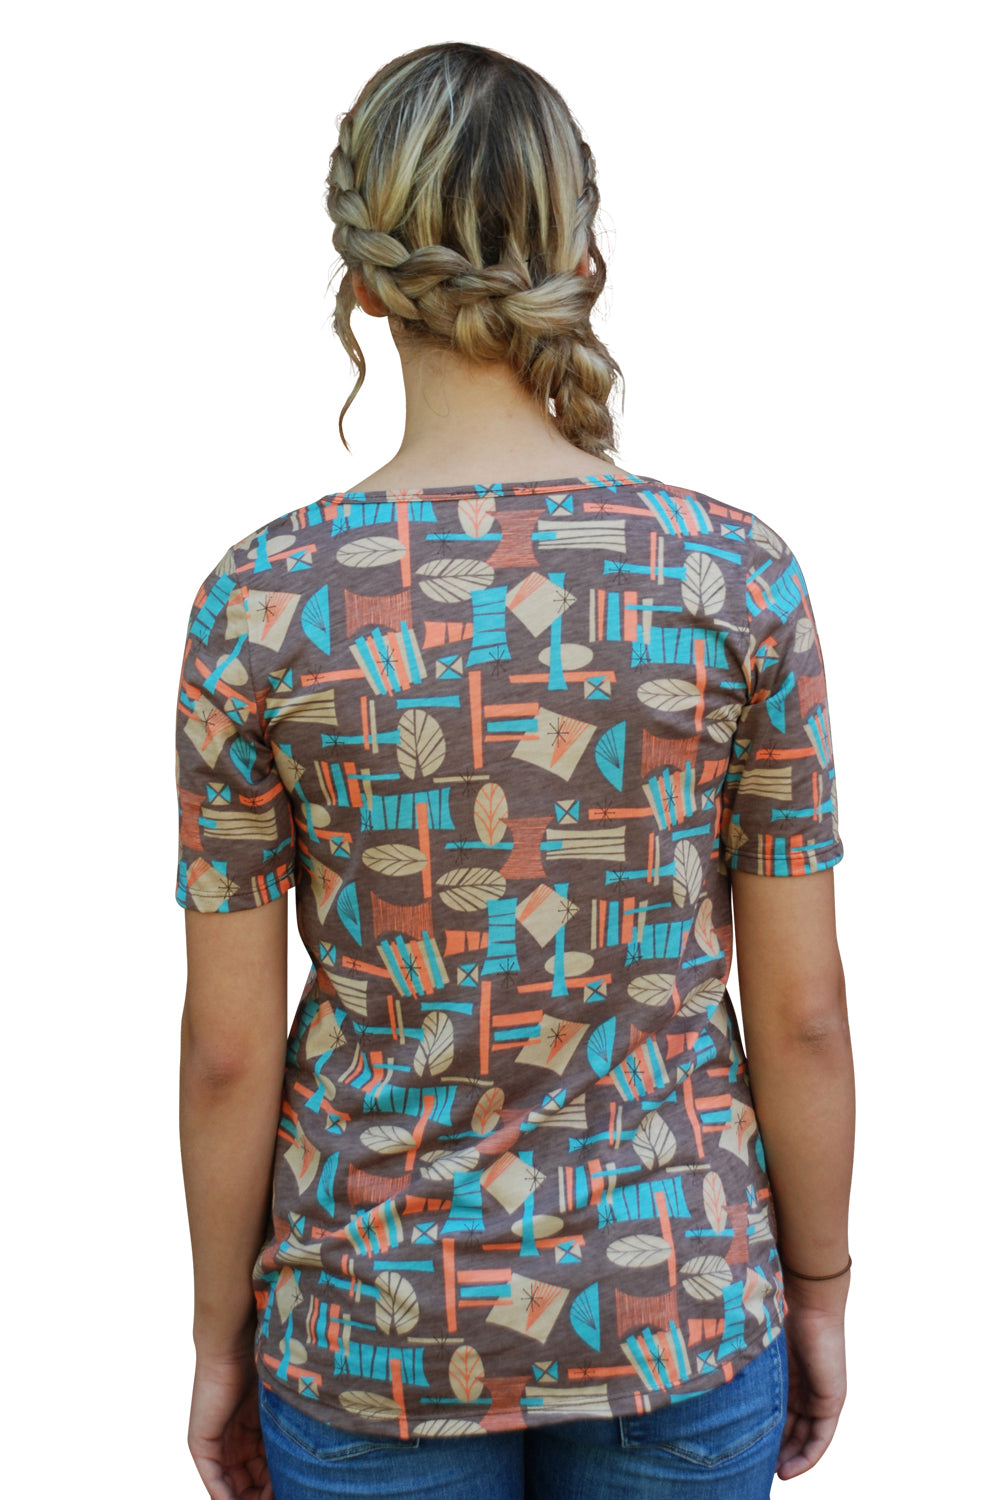 Back view of brown peach and aqua v-neck cotton tee on model with braided hair